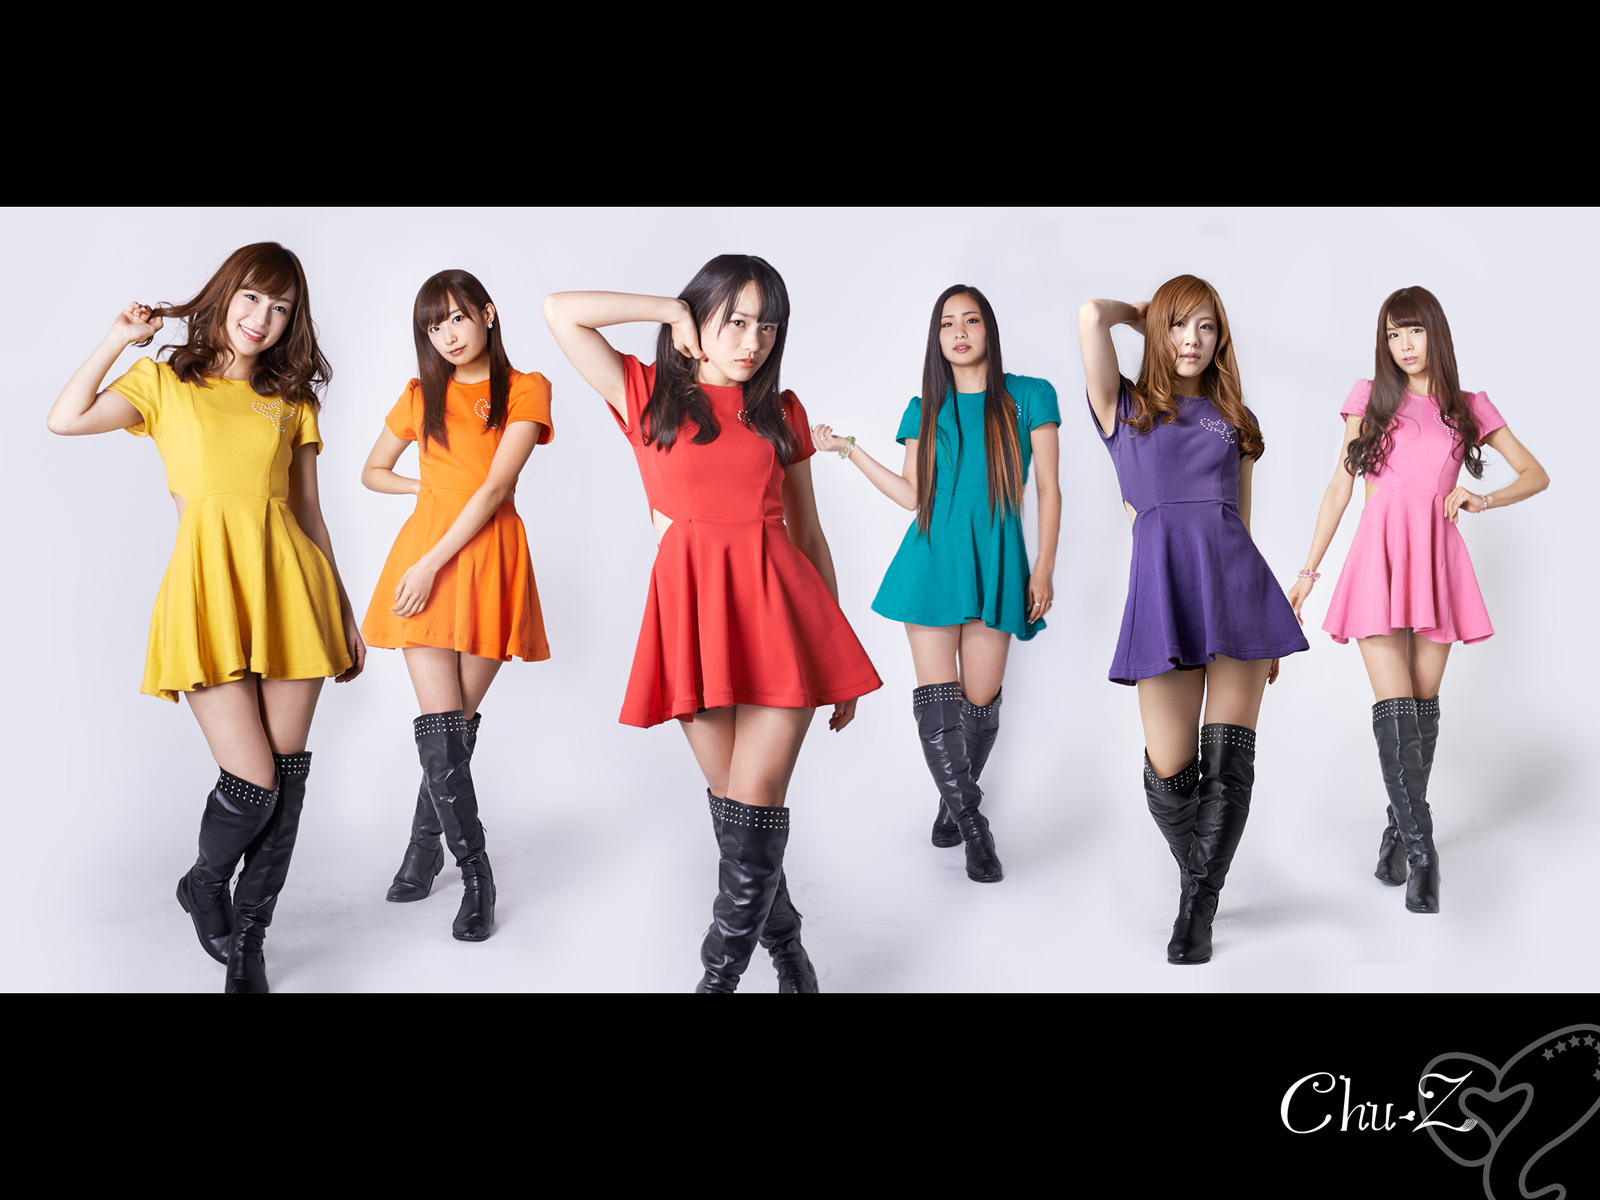 Idol group “Chu-Z” makes major debut and will release full-album”Chu-Z My Music” on July 9th!